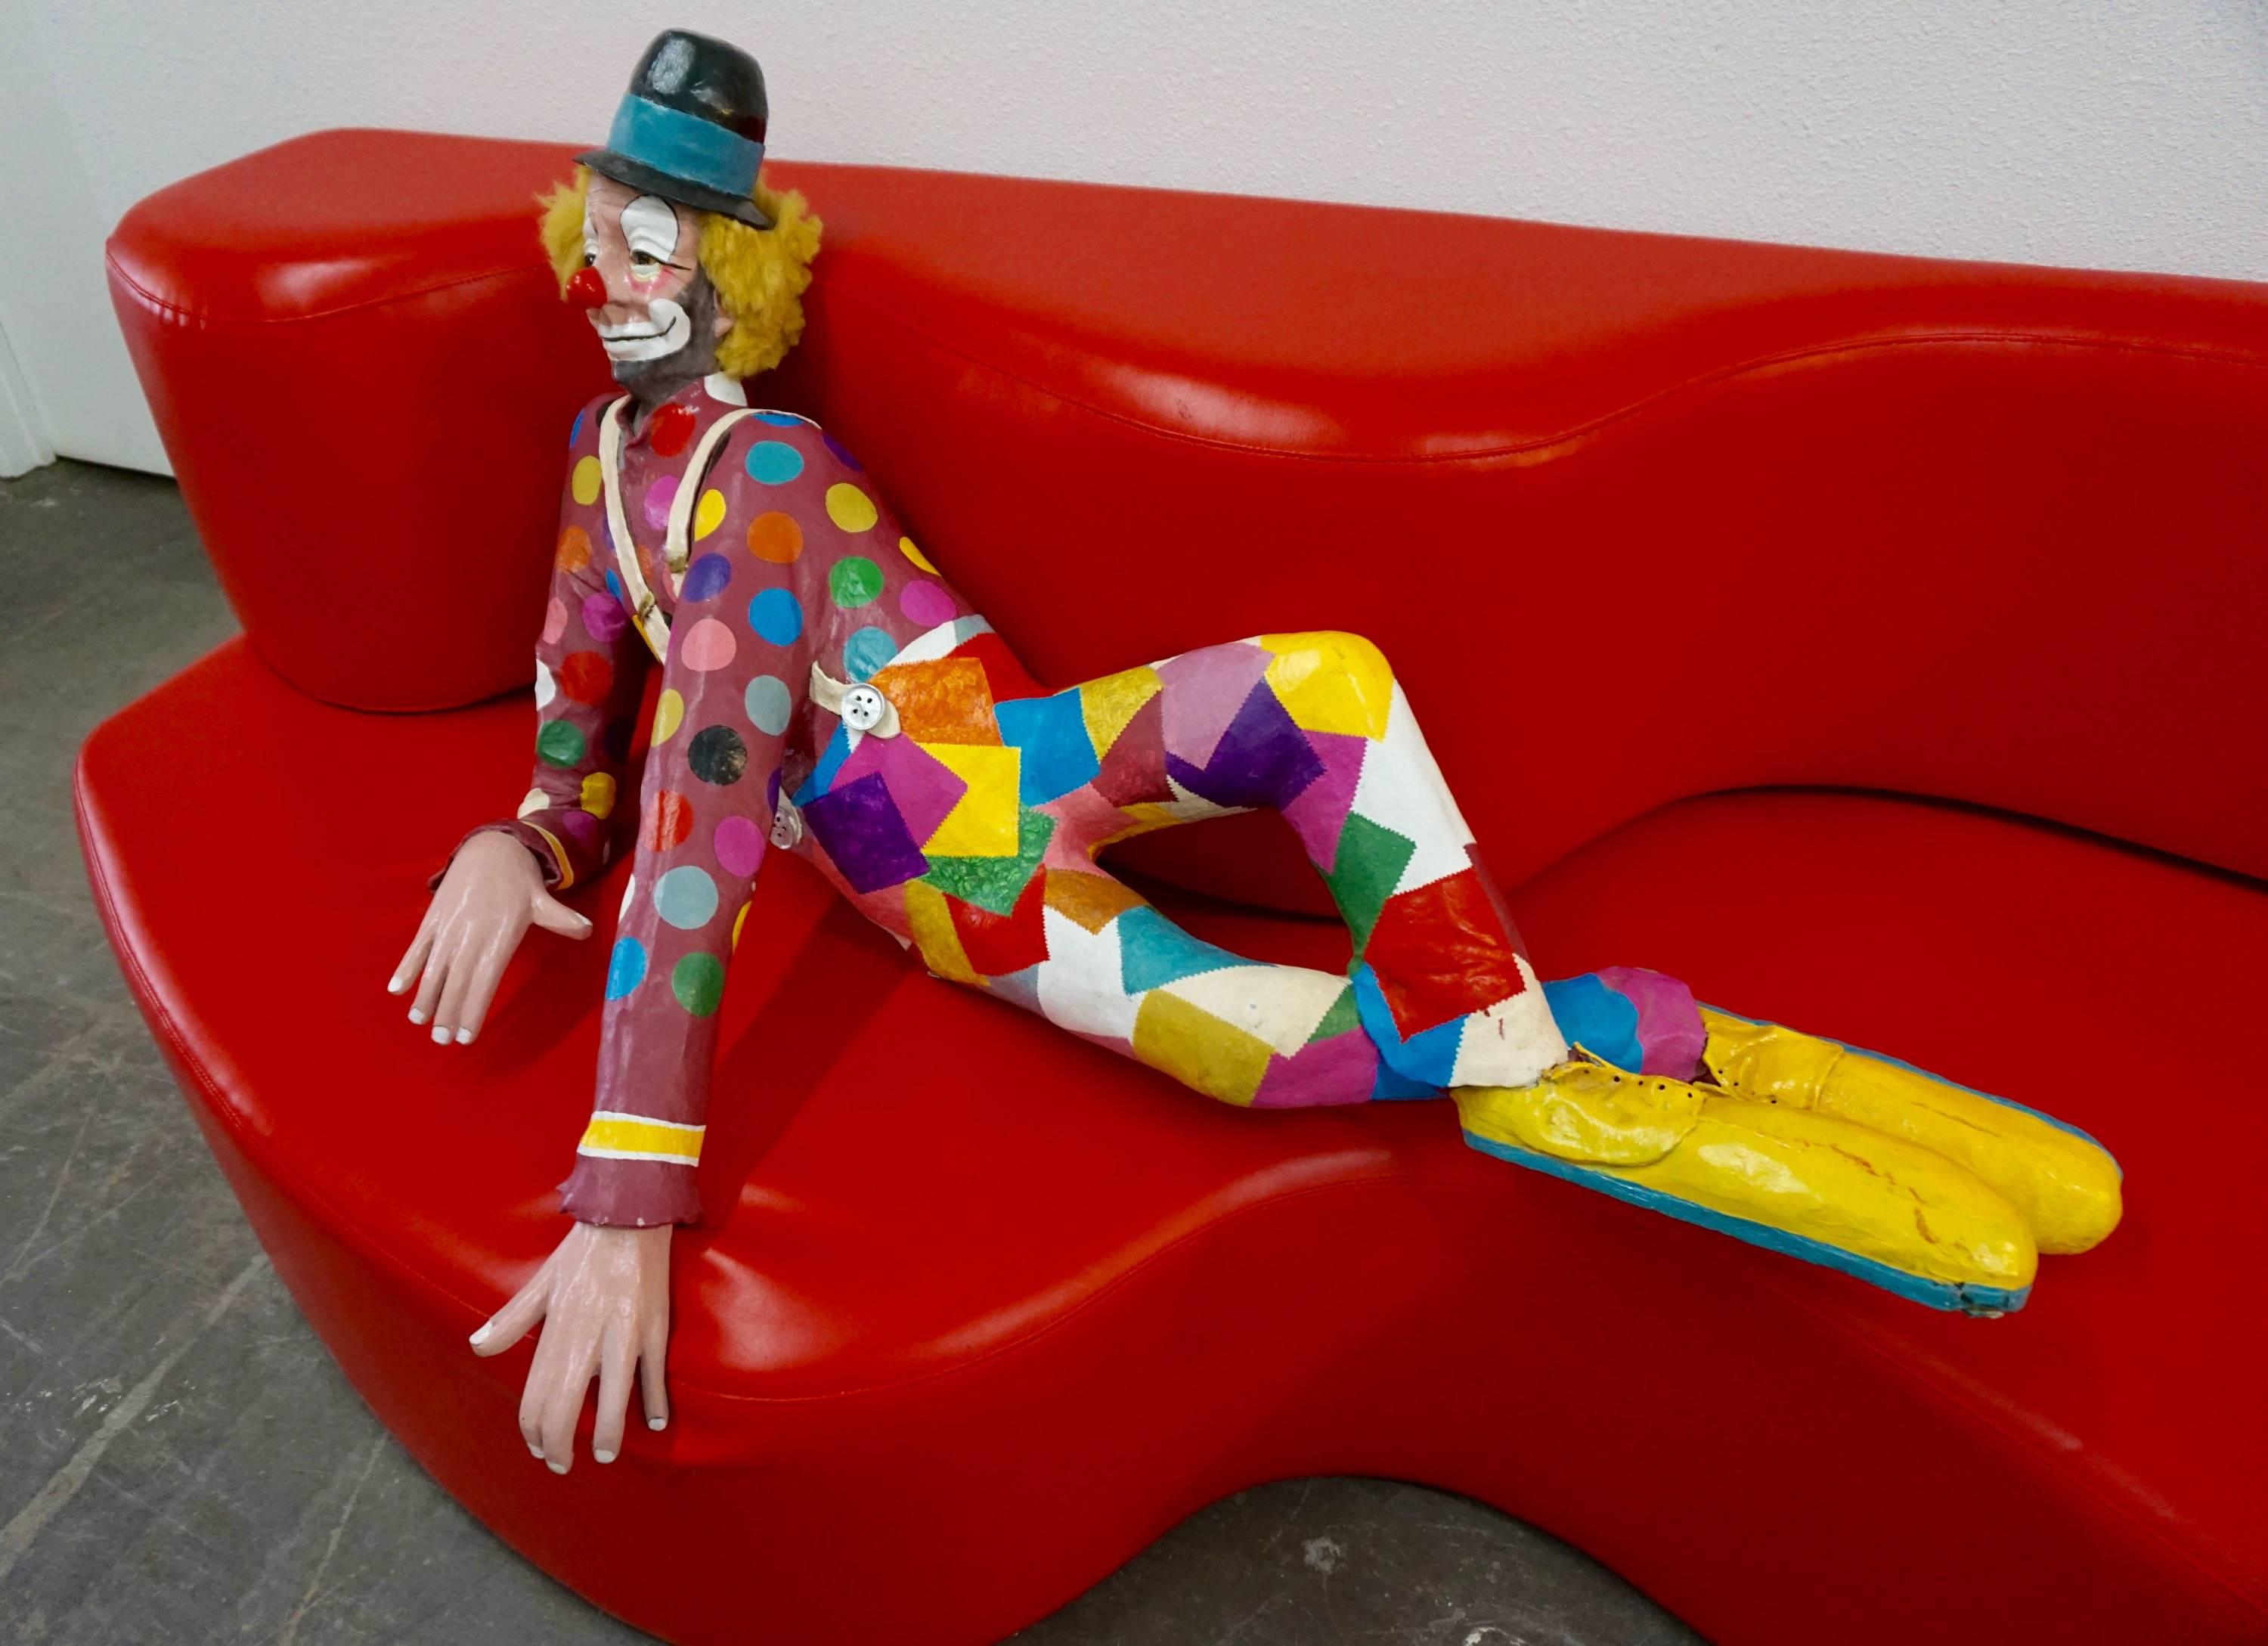 Papier mâché likeness of a reclining circus clown, hand-painted. Signed and dated "James Kidd 1991".